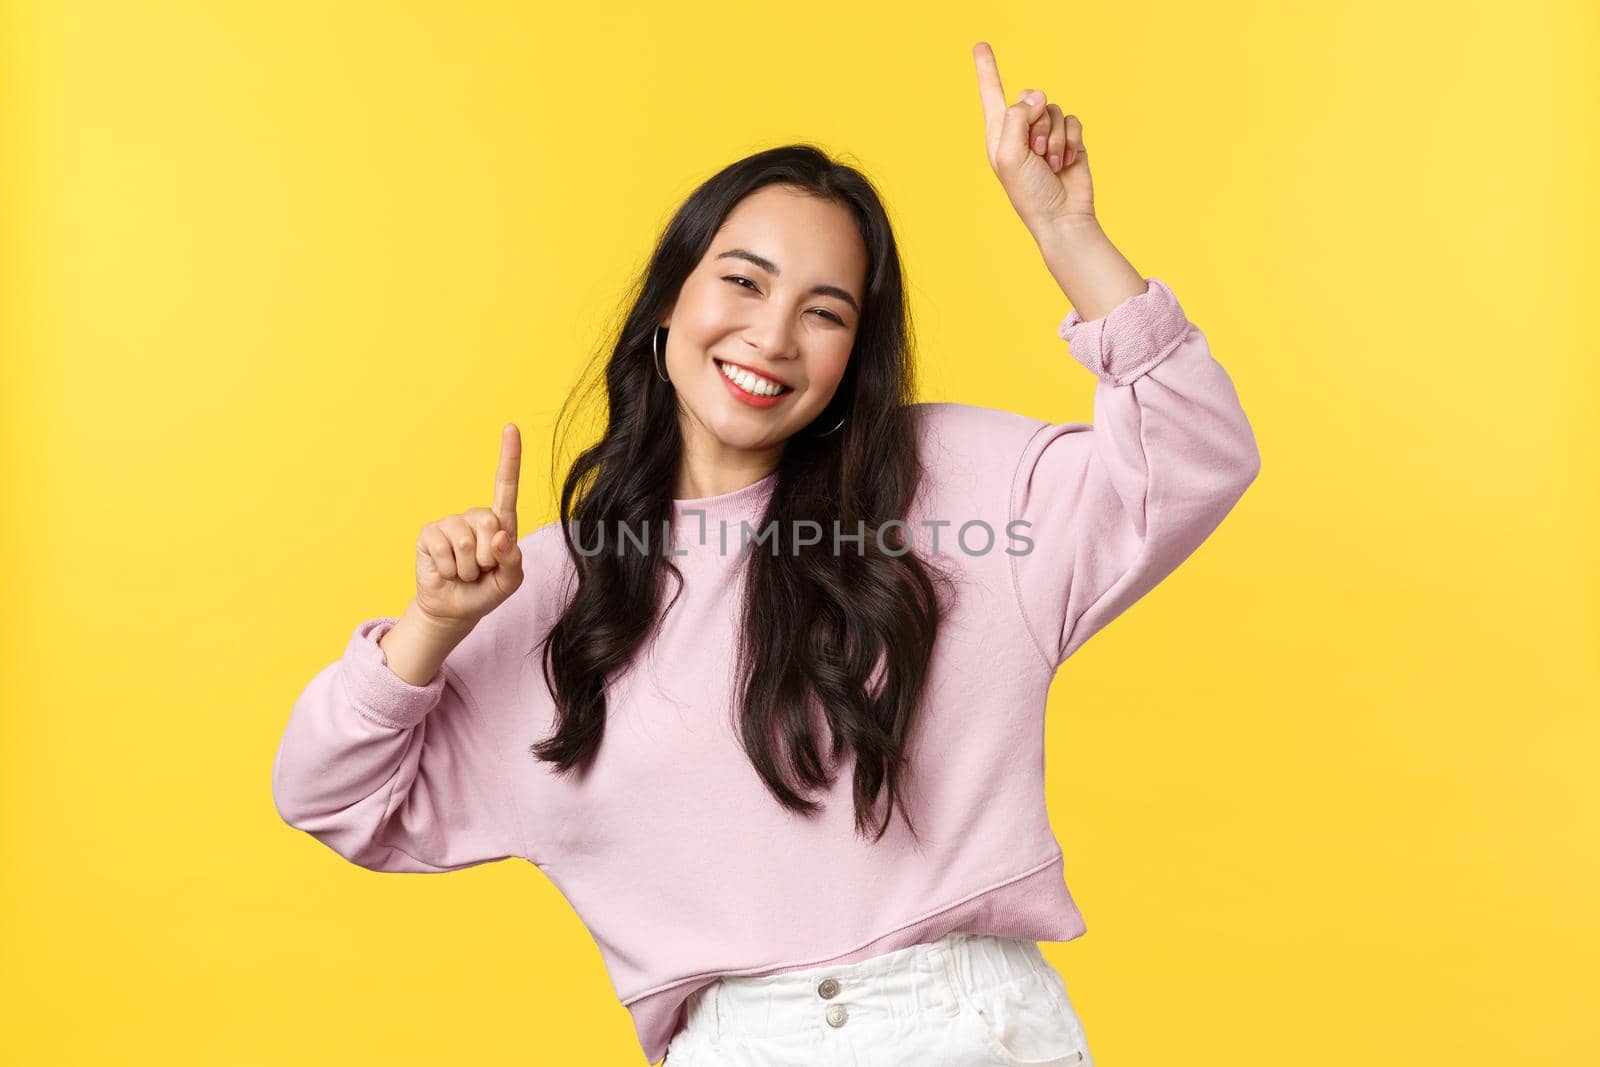 People emotions, lifestyle leisure and beauty concept. Happy carefree attractive korean girl having fun on party, dancing and enjoying summer, raise hands up, smiling broadly, yellow background.